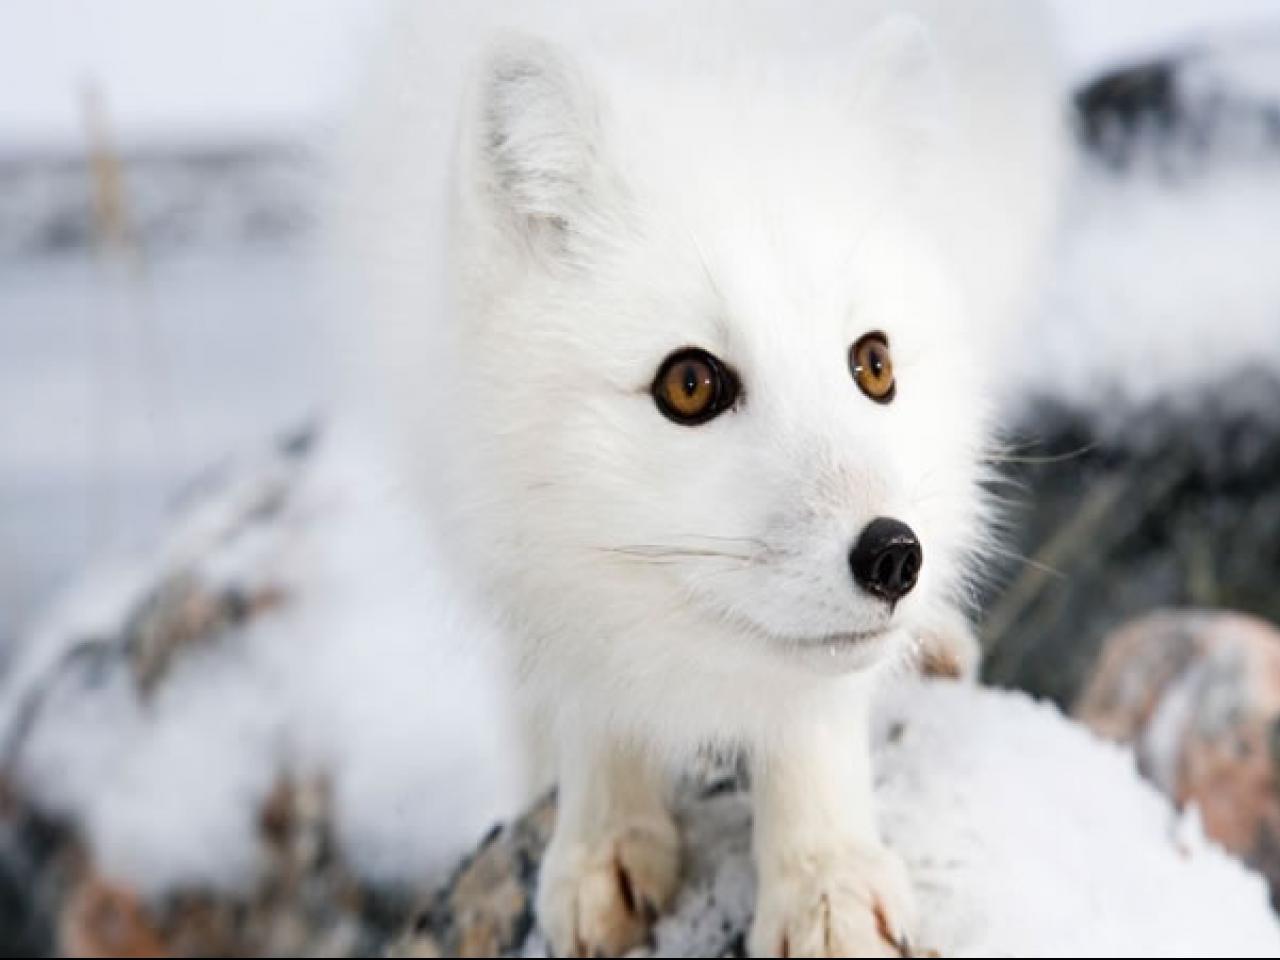 mobile desktop background arctic fox pictures and facts download